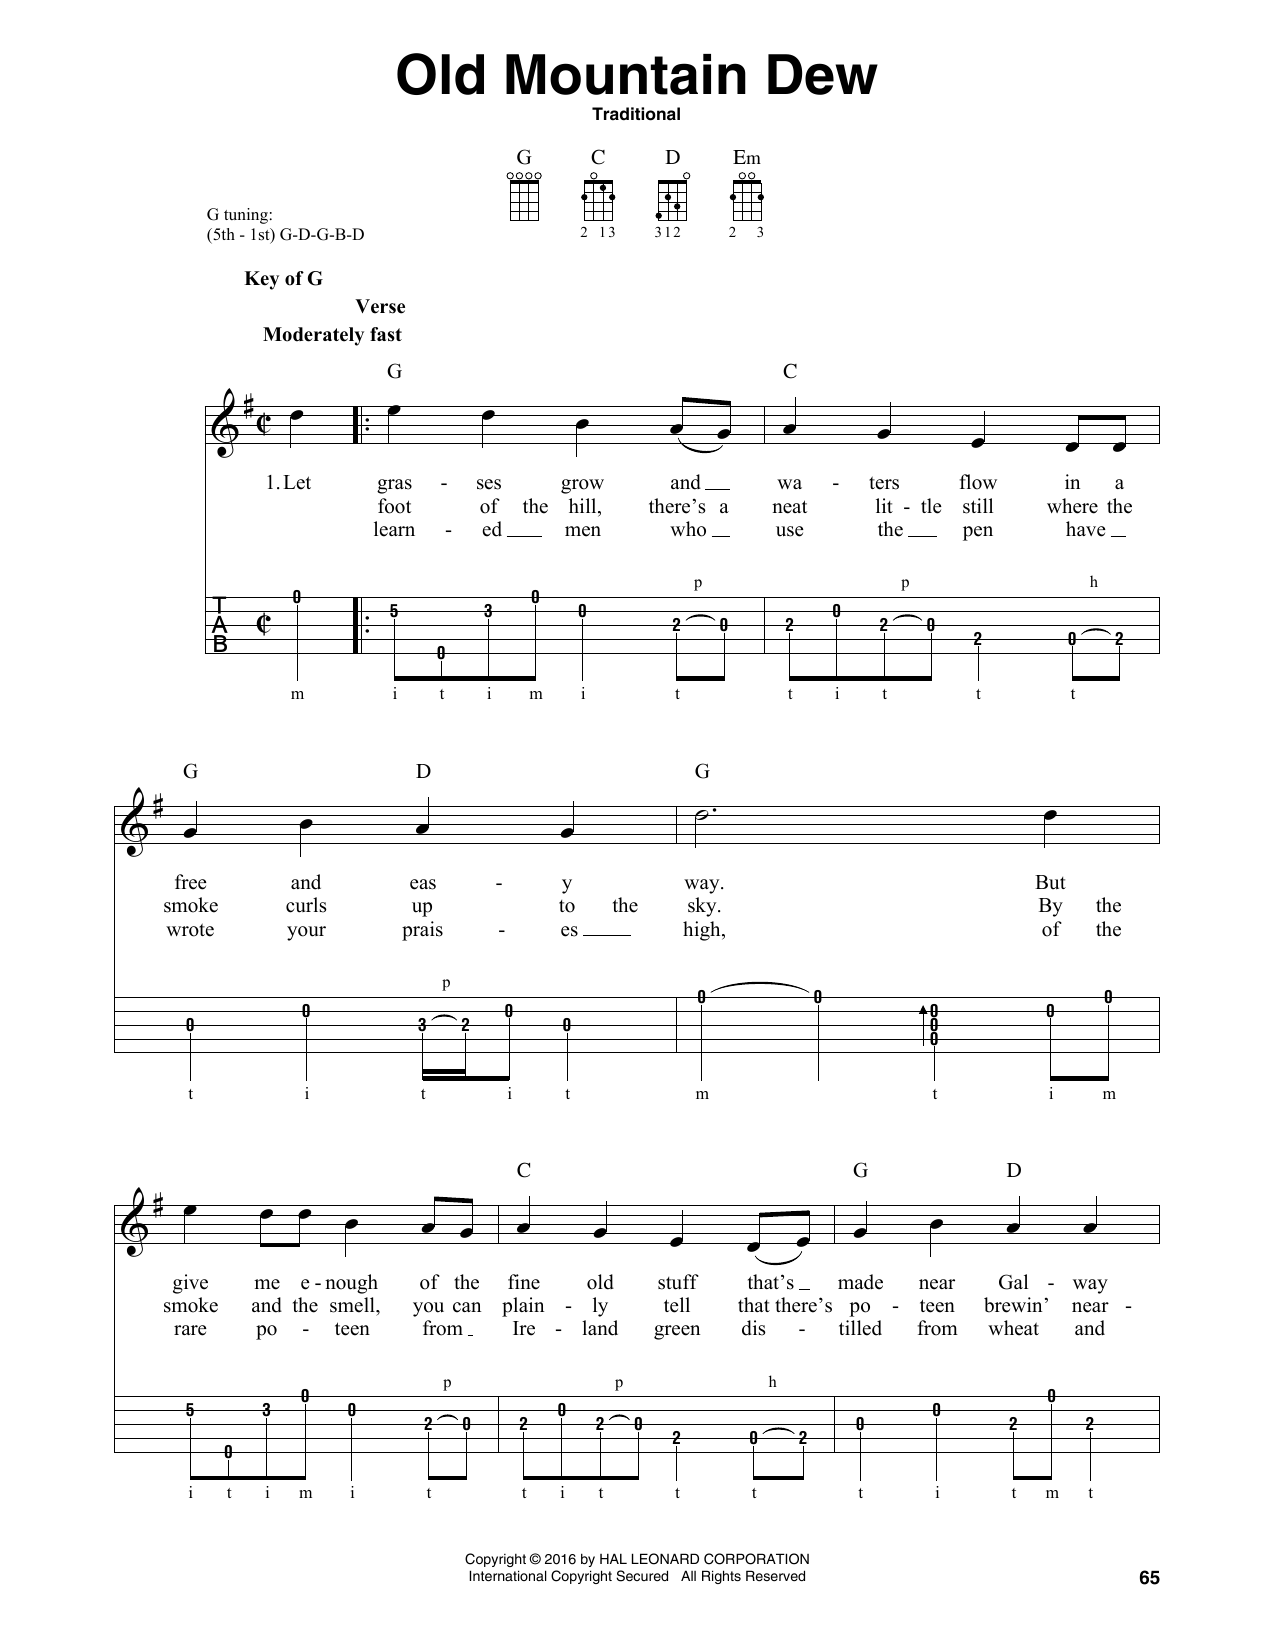 Download Traditional Old Mountain Dew Sheet Music